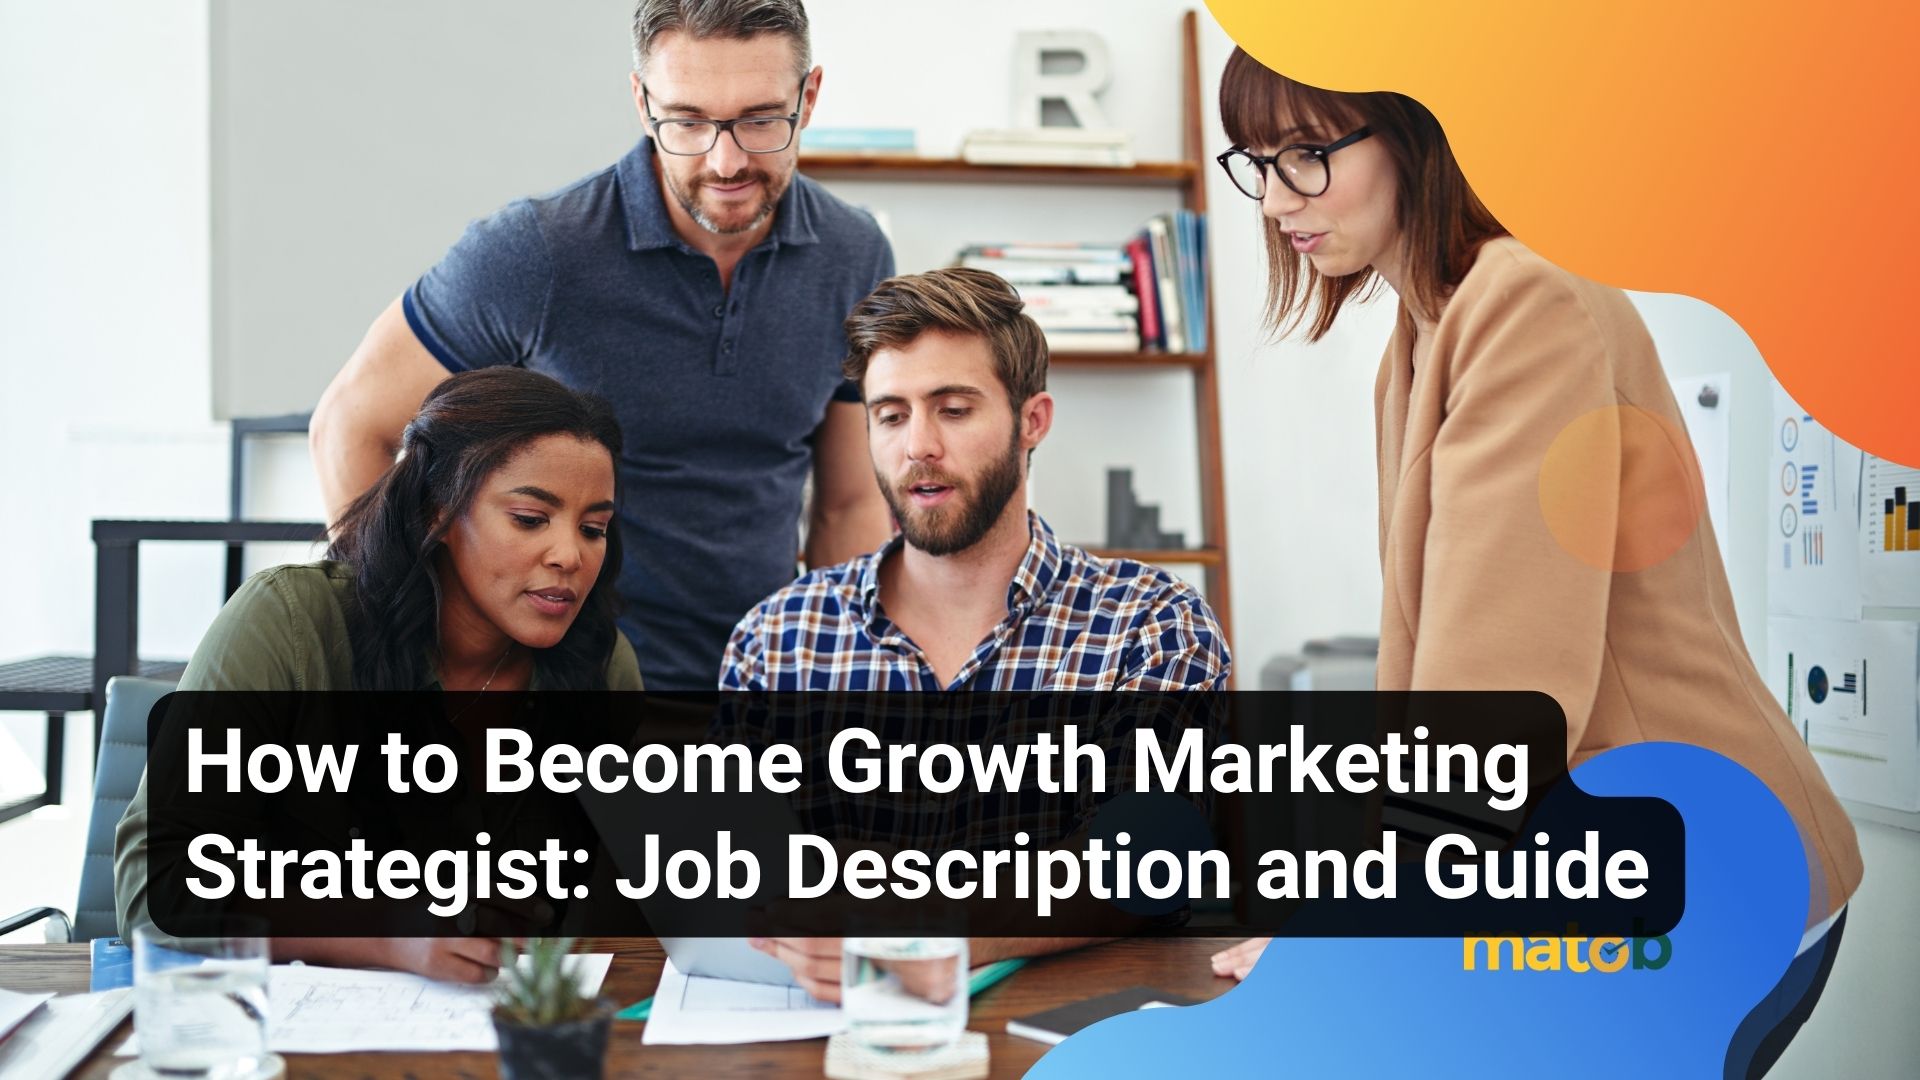 How to Become Growth Marketing Strategist: Job Description and Guide